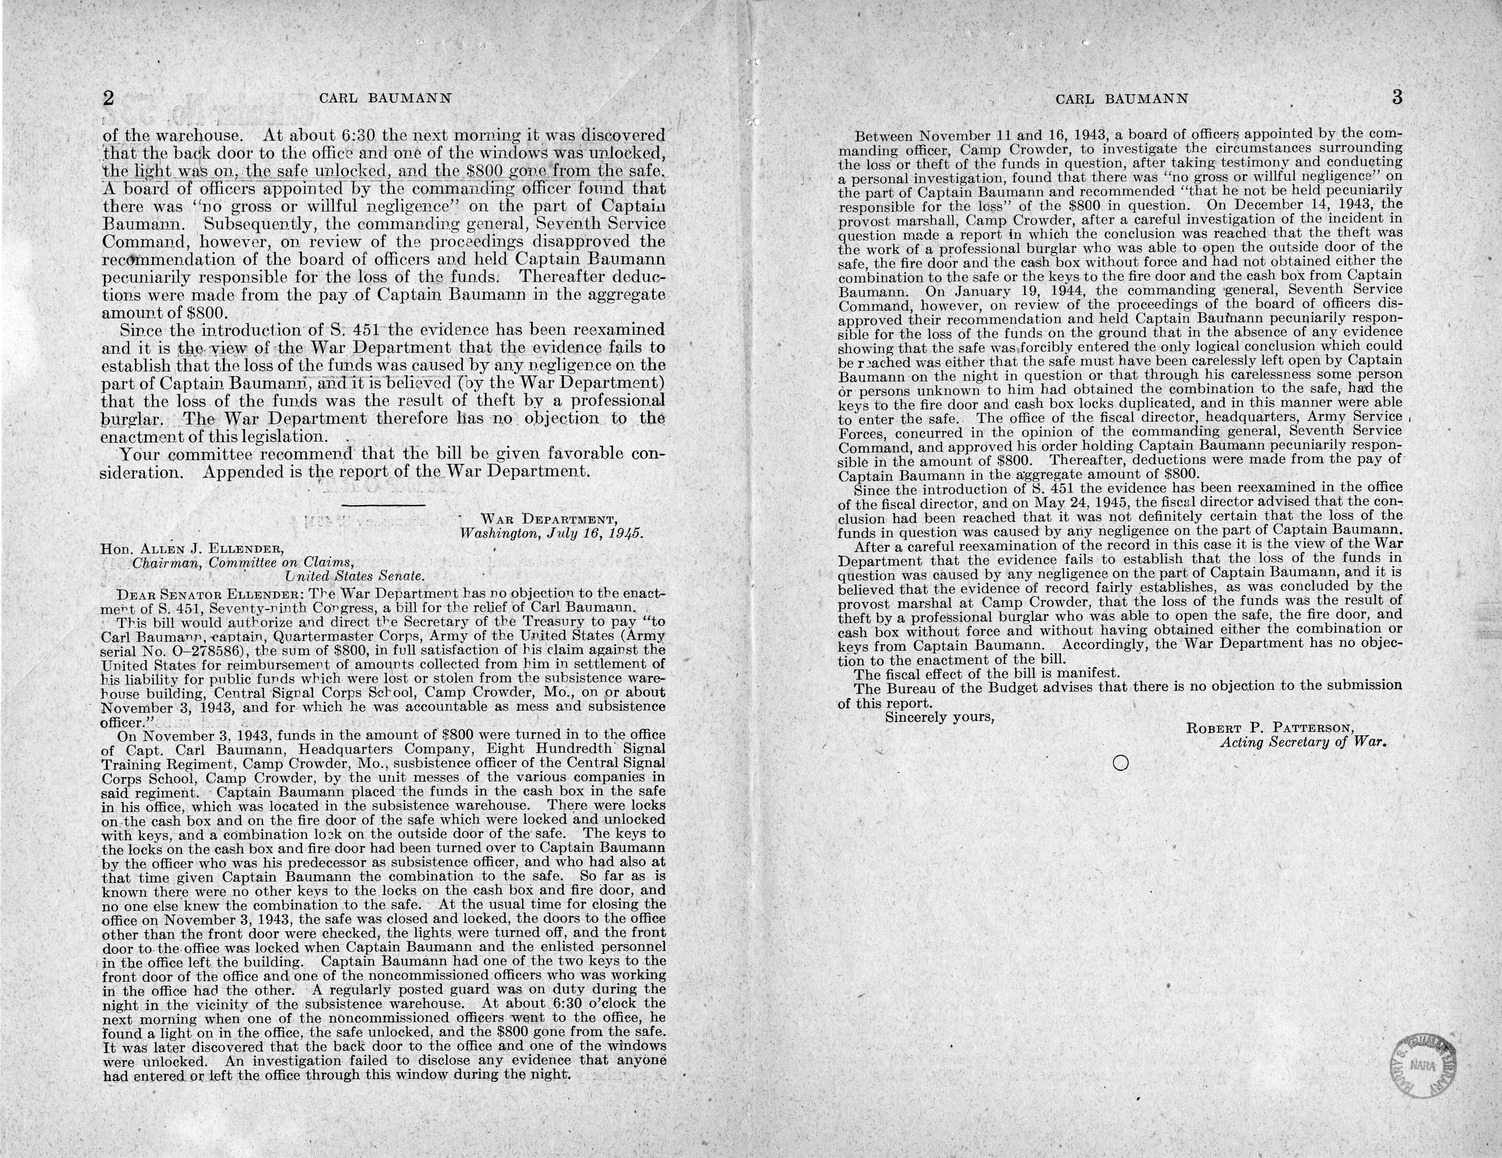 Memorandum from Frederick J. Bailey to M. C. Latta, S. 451, For the Relief of Carl Baumann, with Attachments